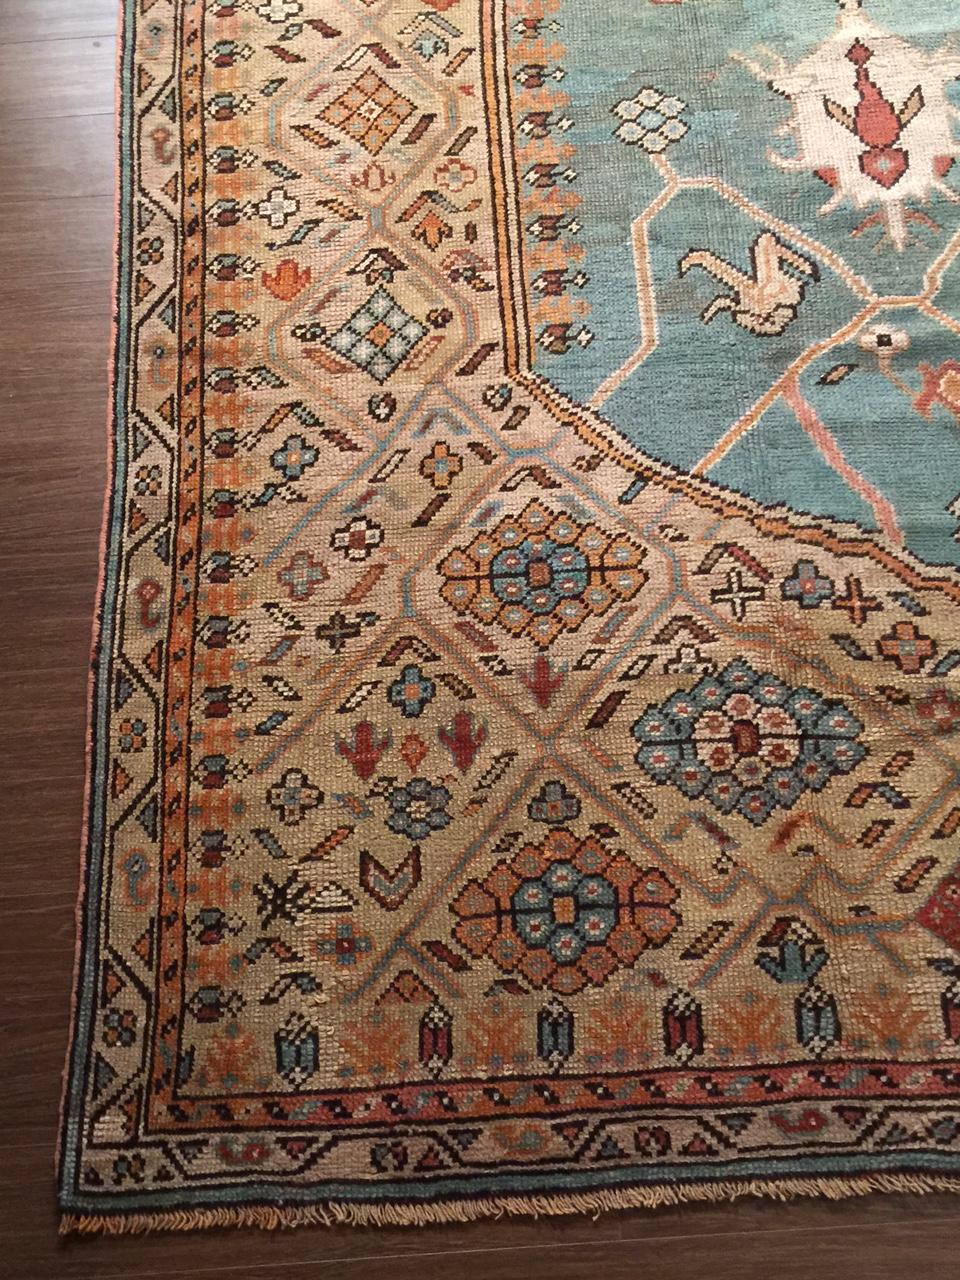 Hand-Woven Antique Turquoise Oushak Rug  8'6 x 12'5 For Sale